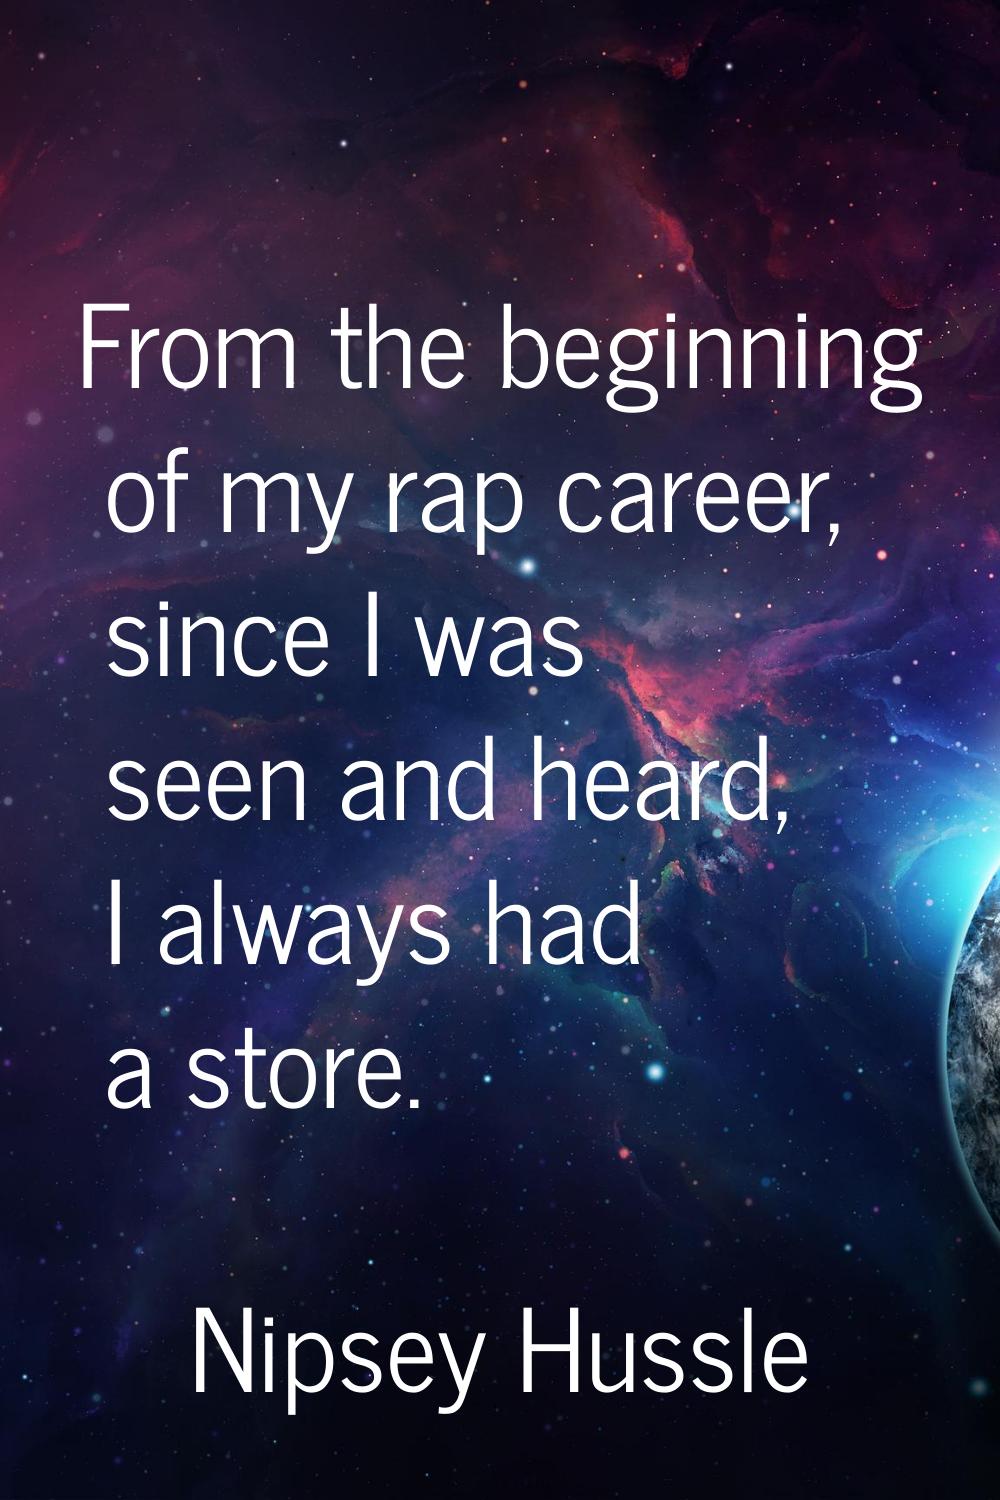 From the beginning of my rap career, since I was seen and heard, I always had a store.